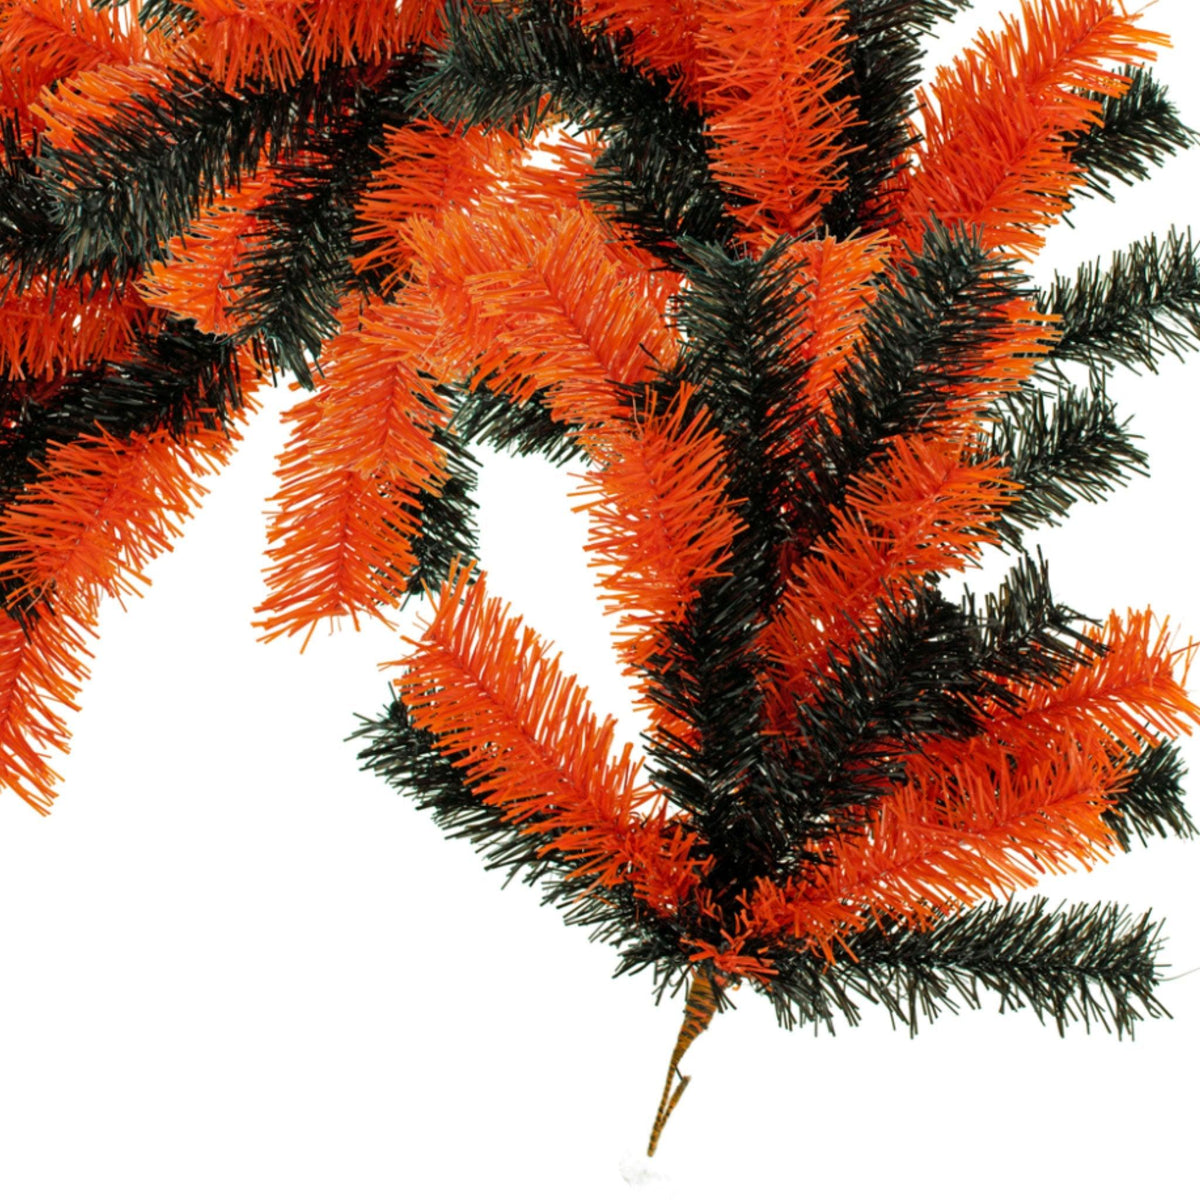 Shop for Lee Display's brand new 6FT Orange and Black Halloween Tinsel Brush Garlands on sale now at leedisplay.com.  End section